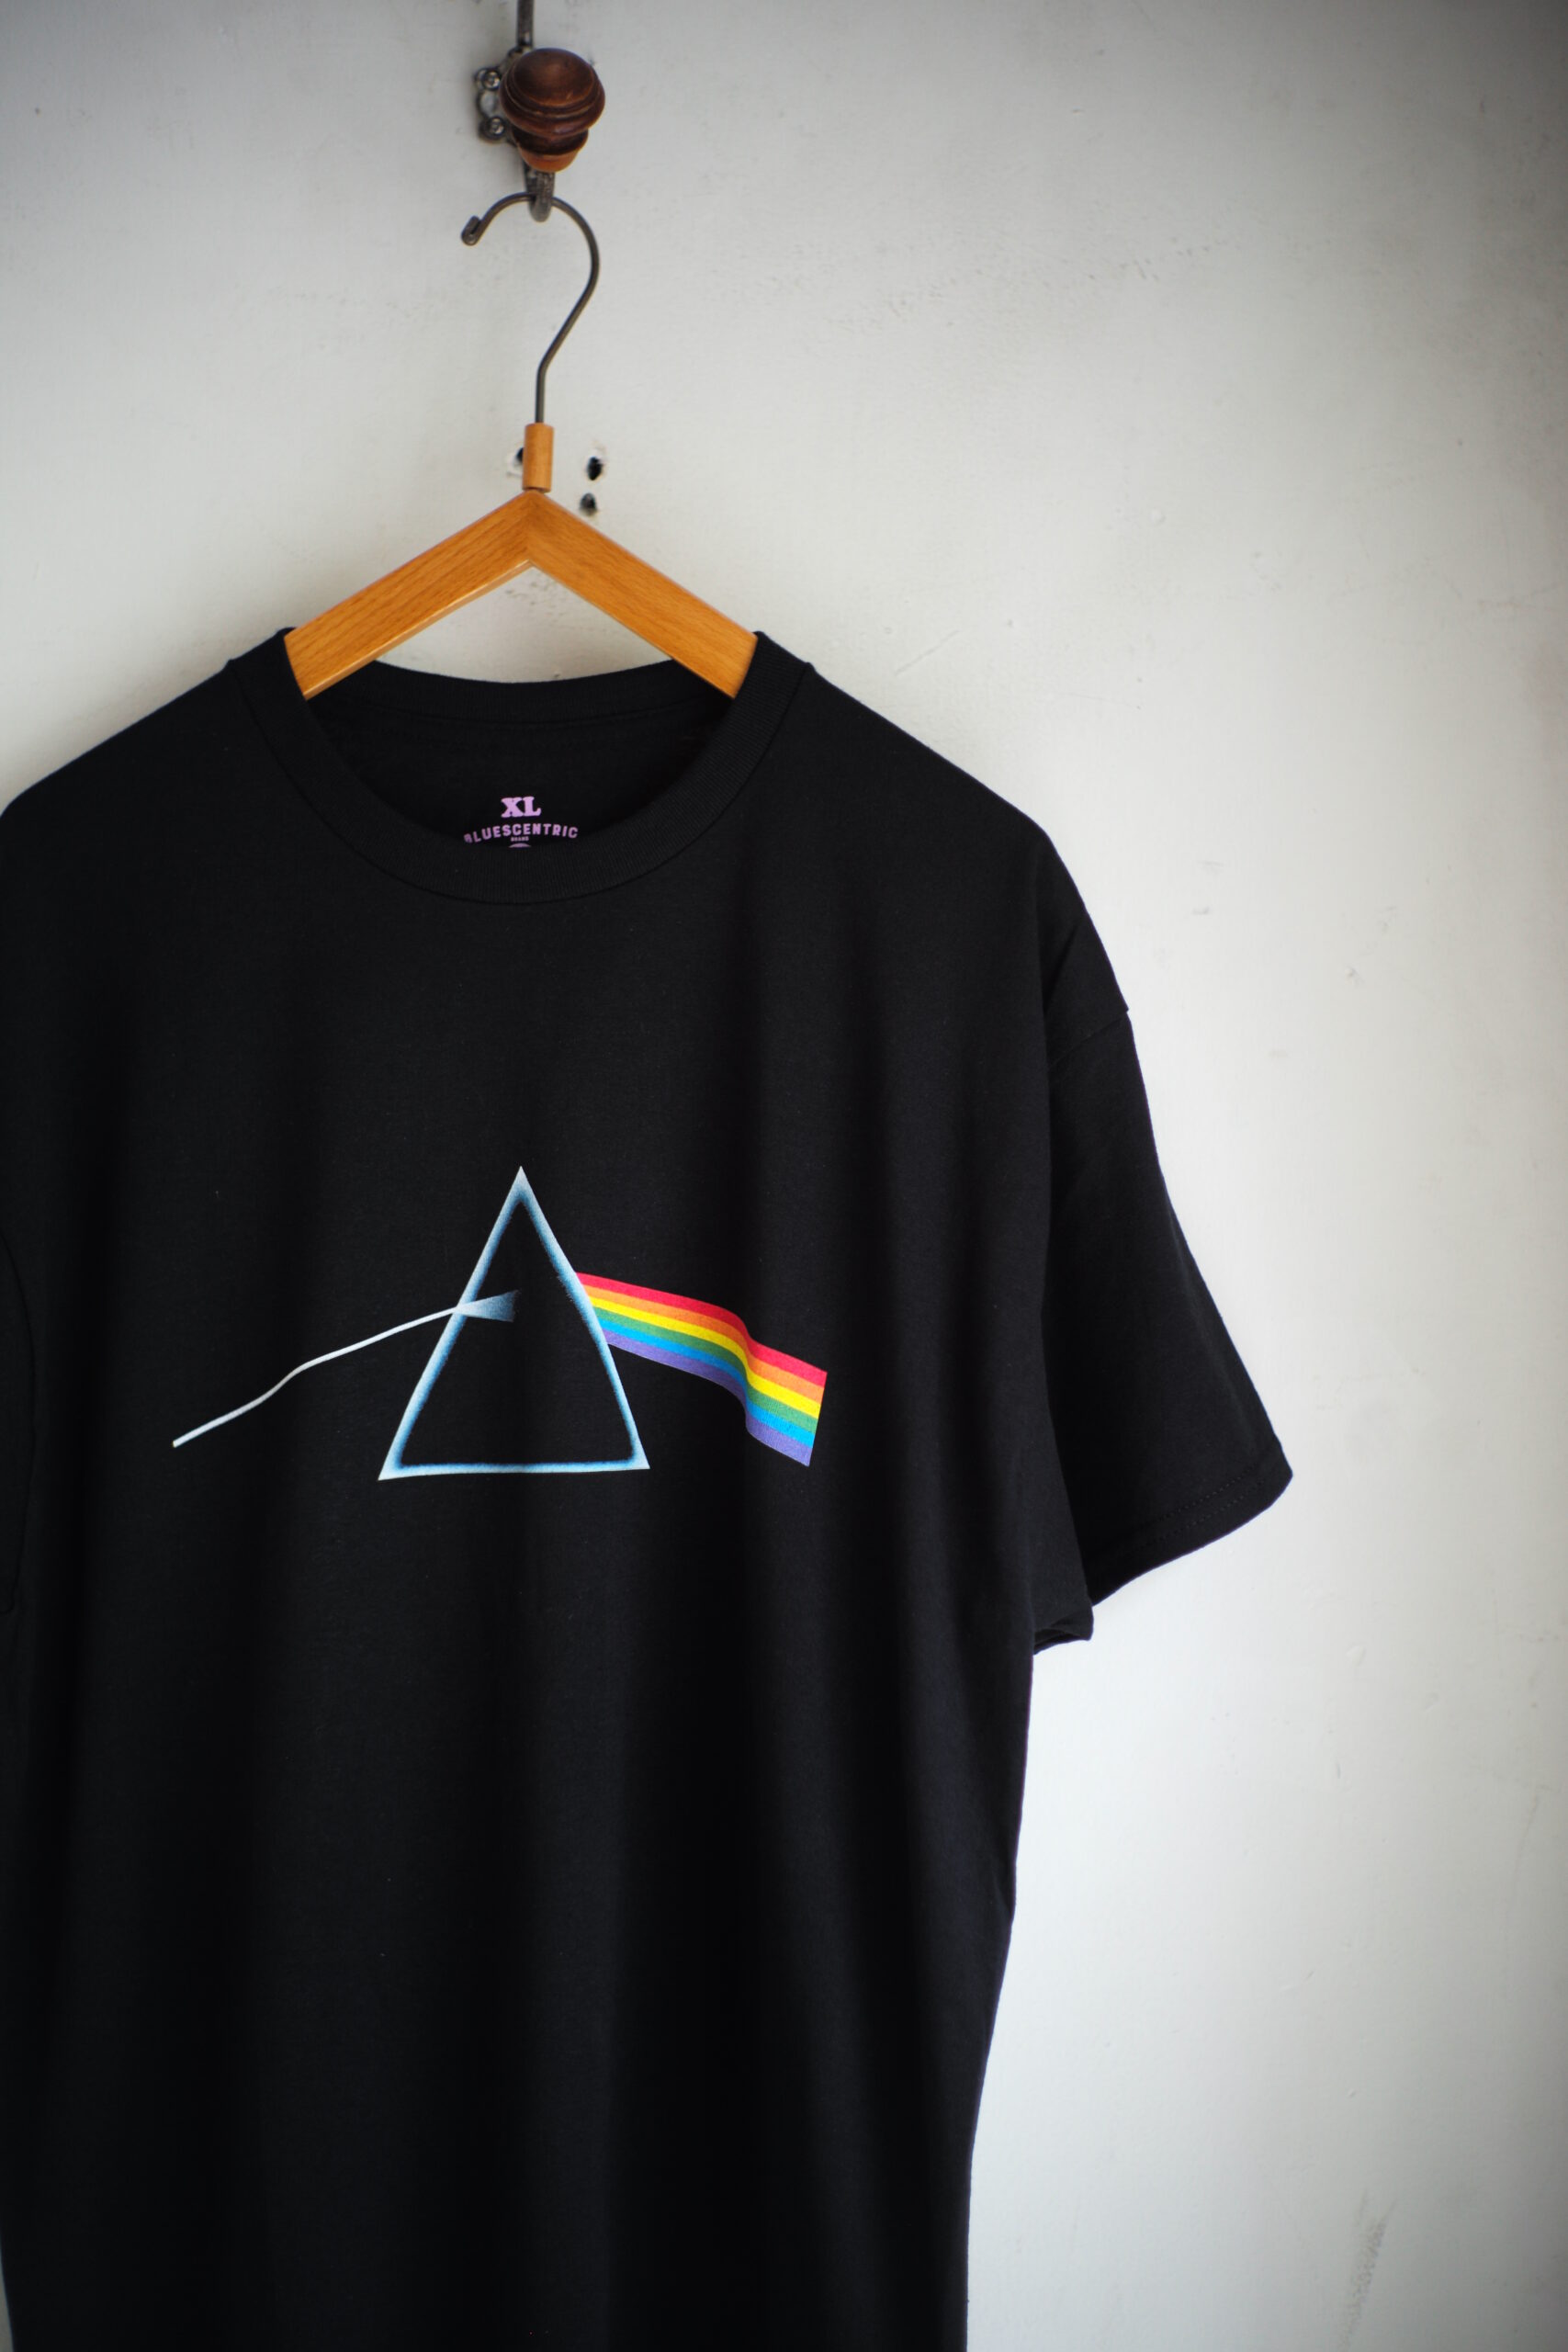 BLUESCENTRIC / PINK FLOYD THE DARK SIDE OF THE MOON T-SHIRT